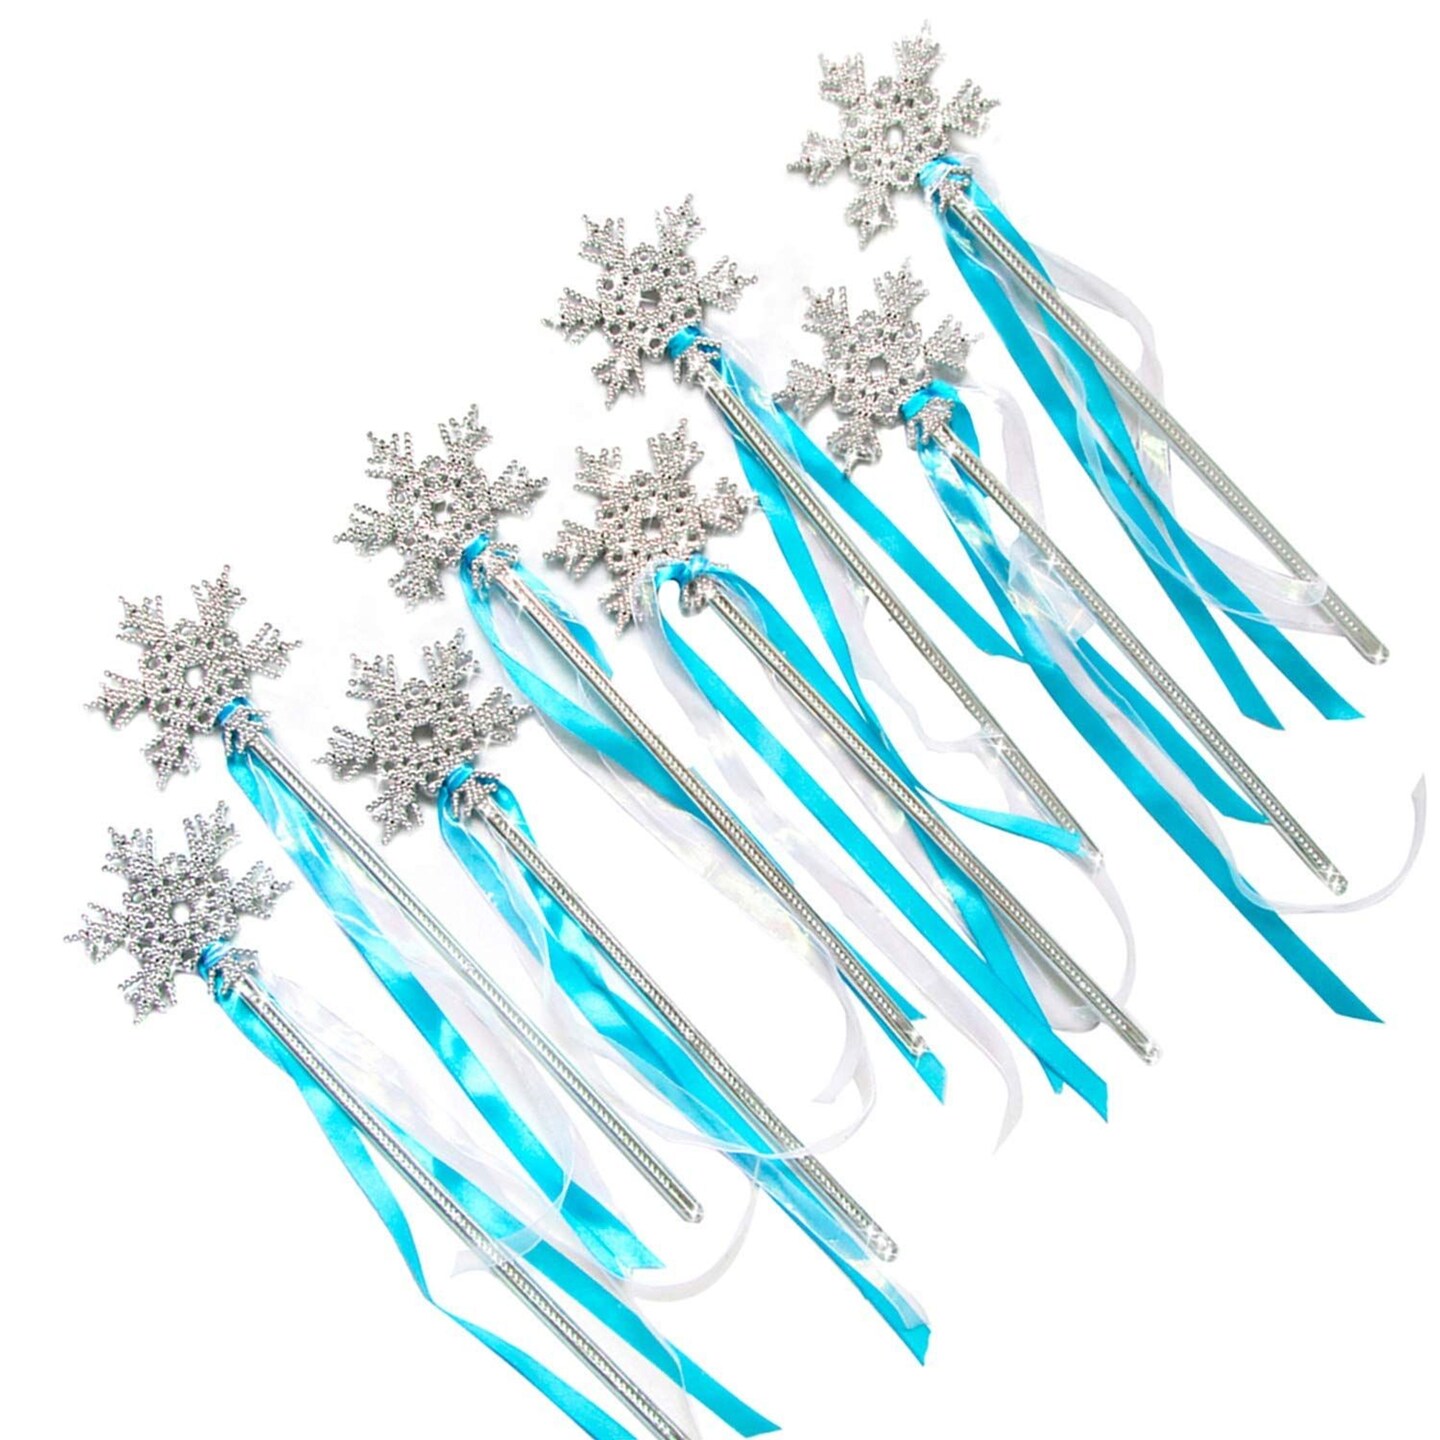 Butterfly Craze Sparkling Snowflake Fairy Wands - Set of 8, Perfect Party Favors for Frozen, Princess, or Fairy-Inspired Birthday Parties &#x26; Dress-Up Play, Shine Like a Star with these Magical Scepters